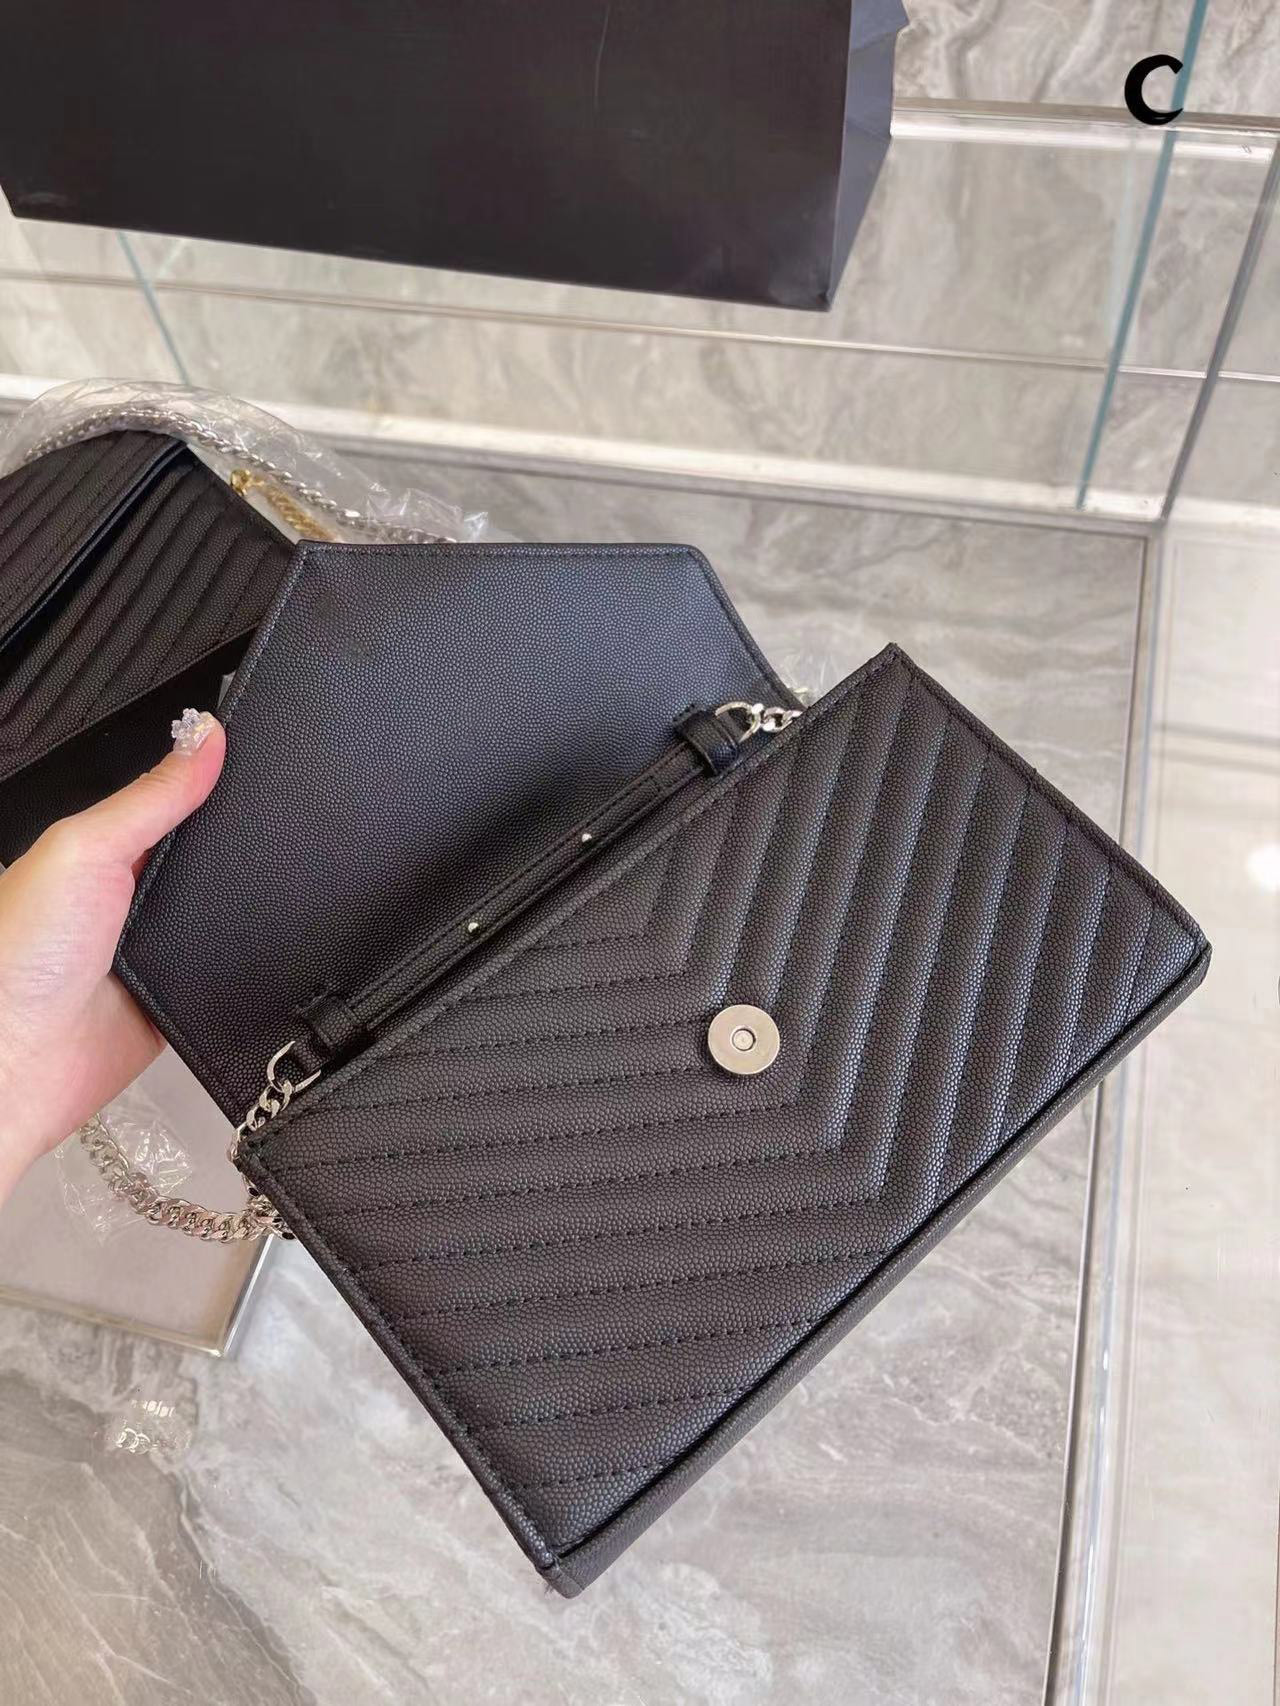 Designer wallet women coin purses luxury handbags shopping envelope bags chain crossbody clutch casual cardholder lady wallets shoulder bag fashion letter tote